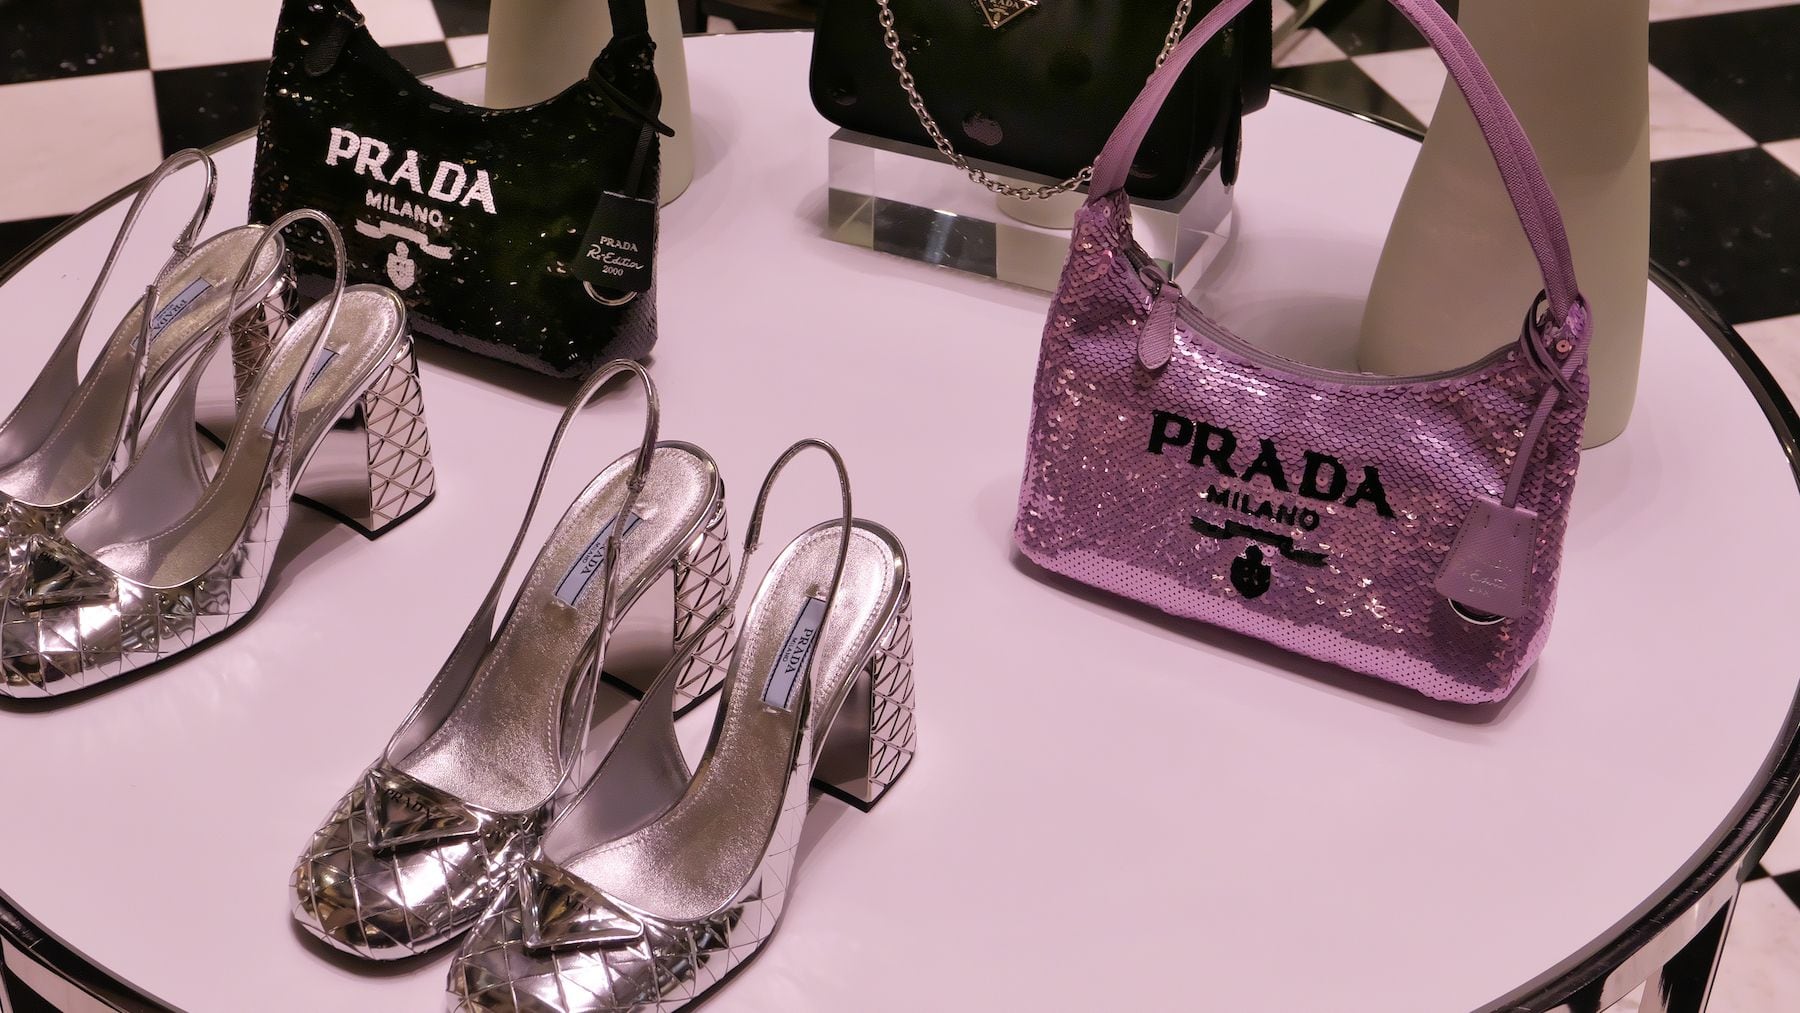 Prada Buys New York Fifth Avenue Store Building for $425 million